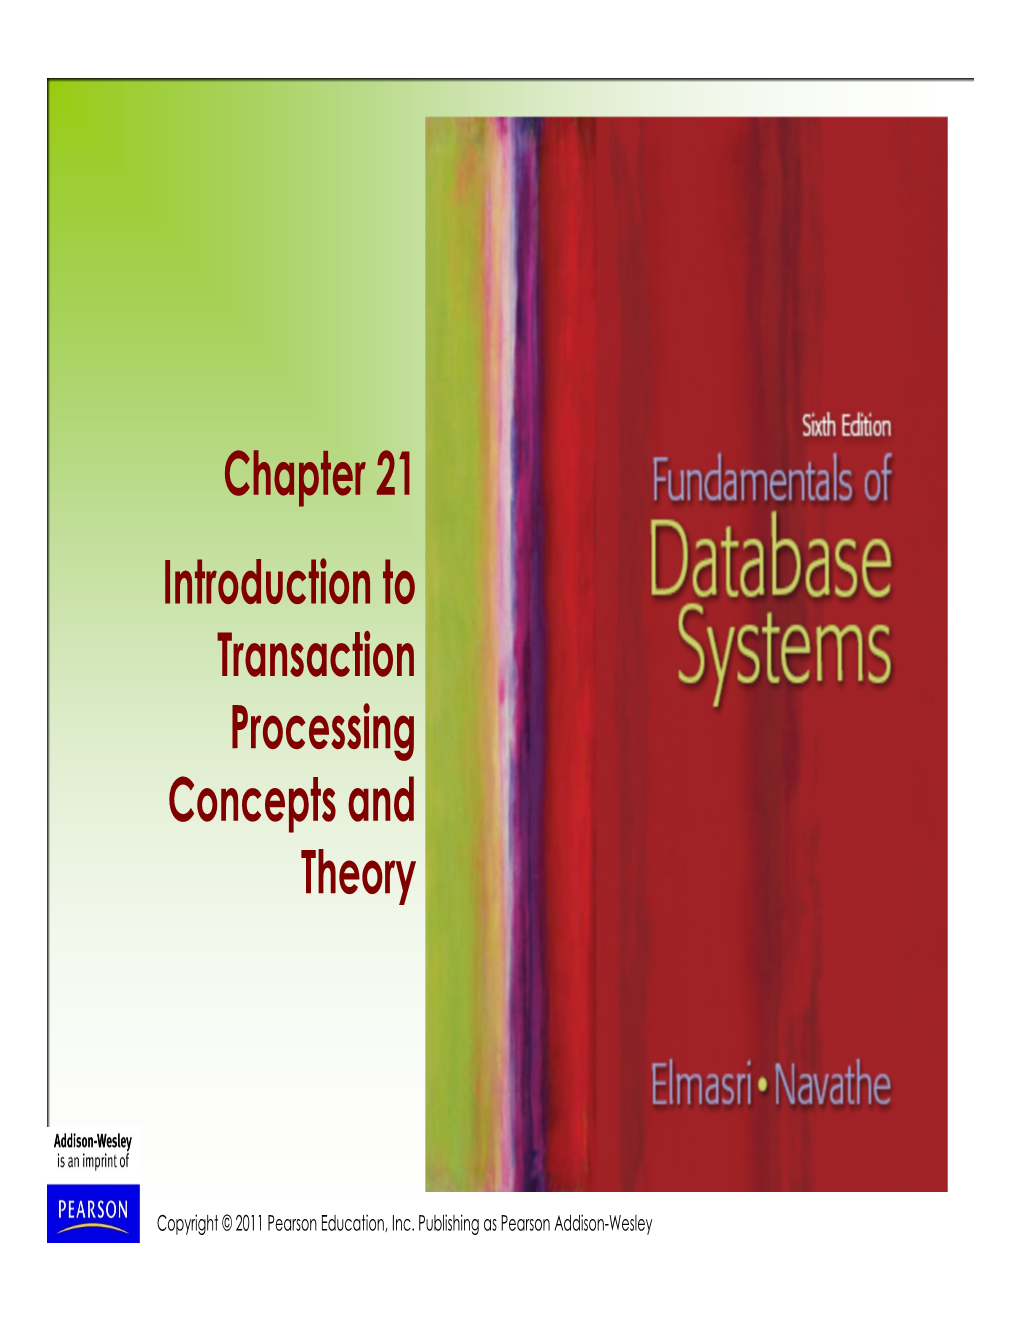 Chapter 21 Introduction to Transaction Processing Concepts and Theory